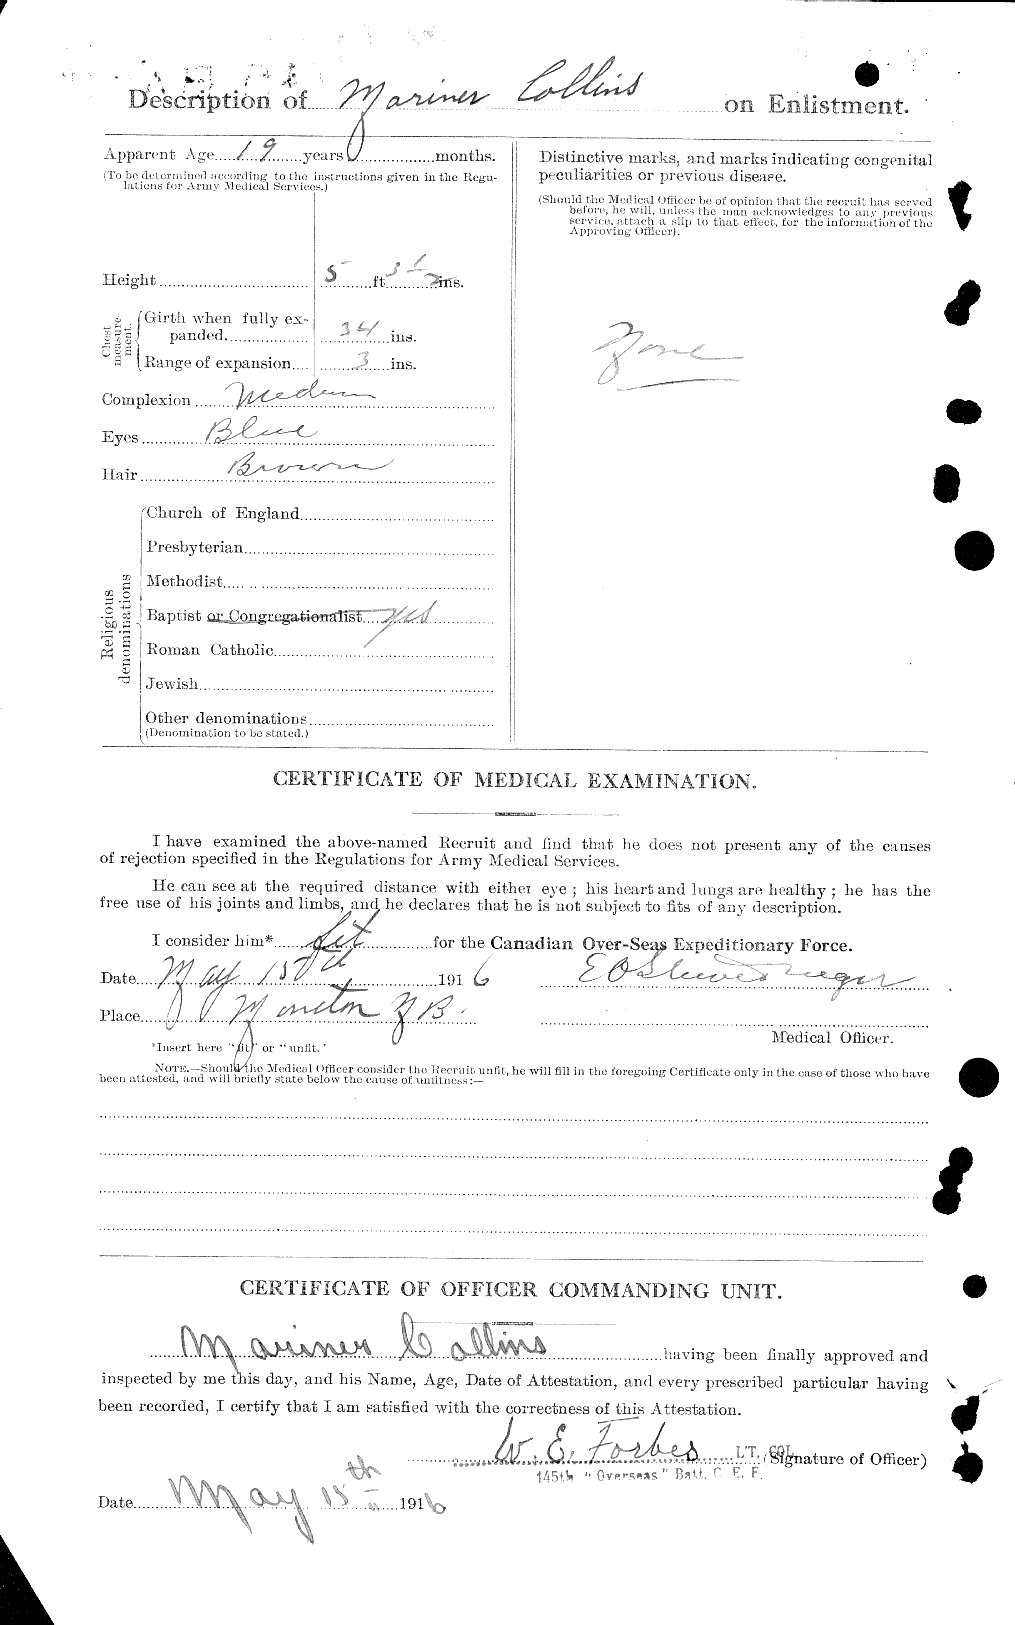 Personnel Records of the First World War - CEF 034456b